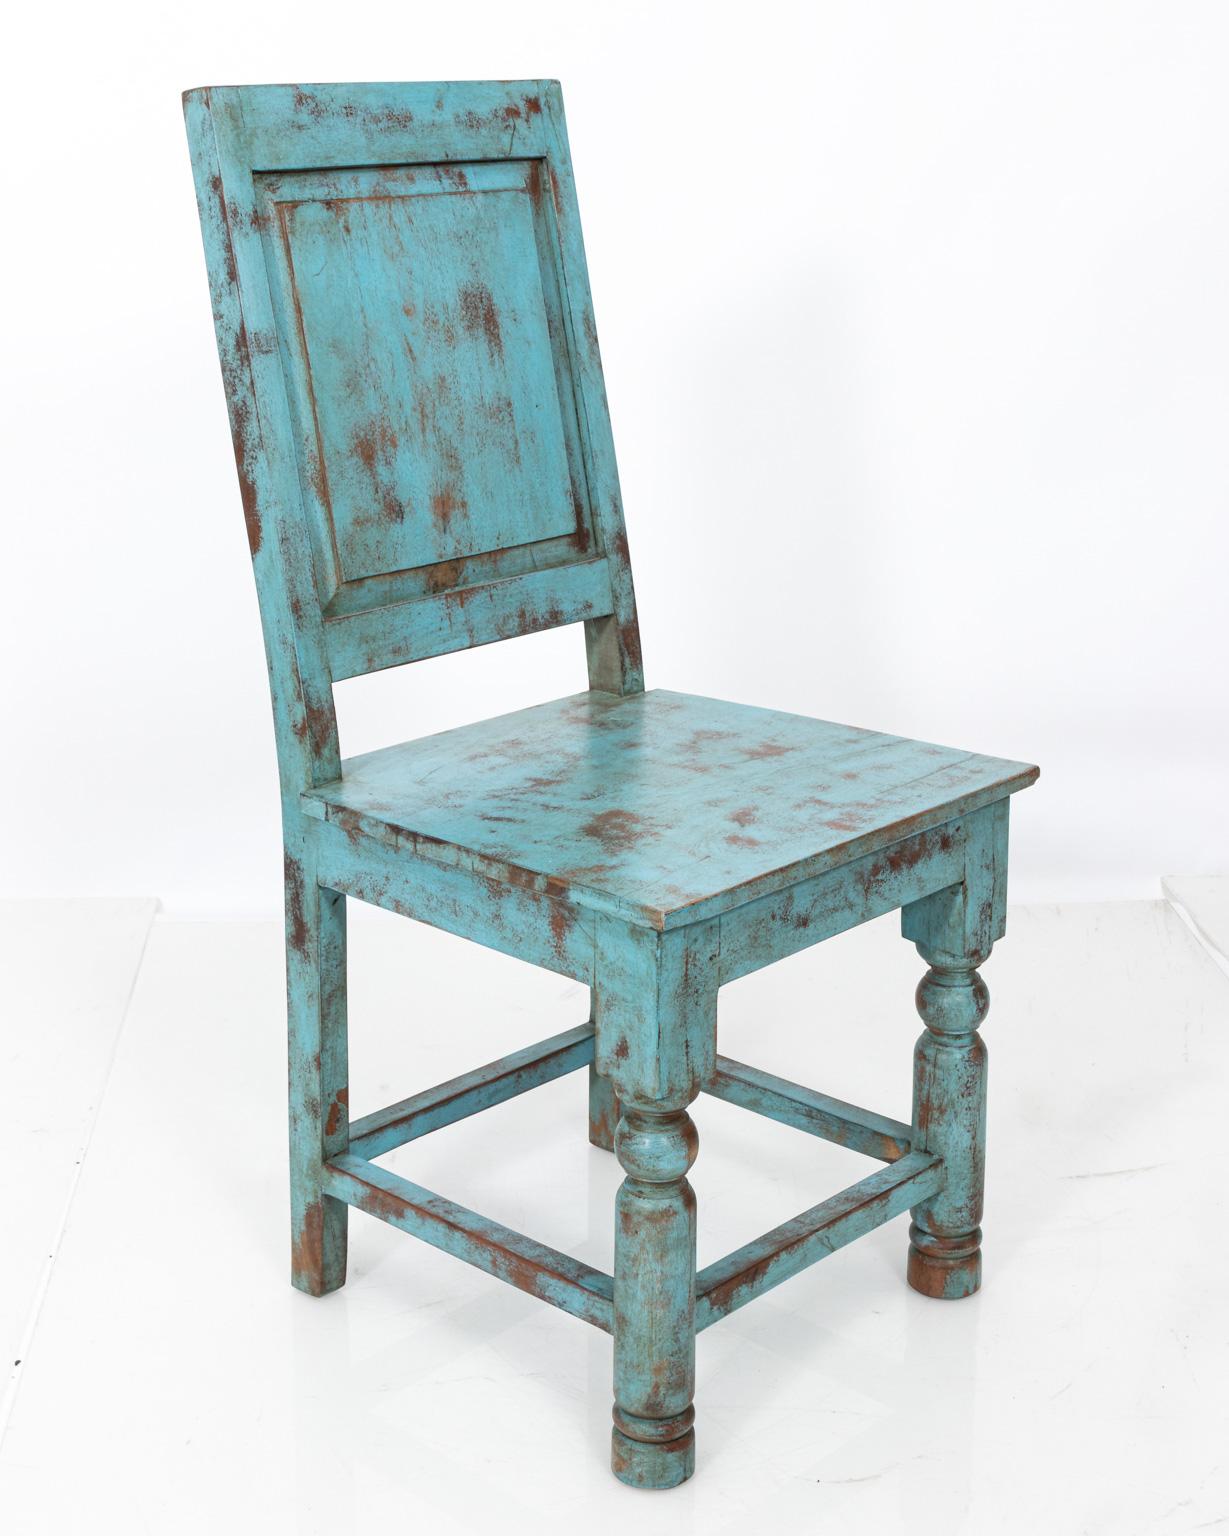 Set of eight Swedish style blue painted chairs with square backs. Please note of wear due to age and daily use including cracks on the seats and backs.